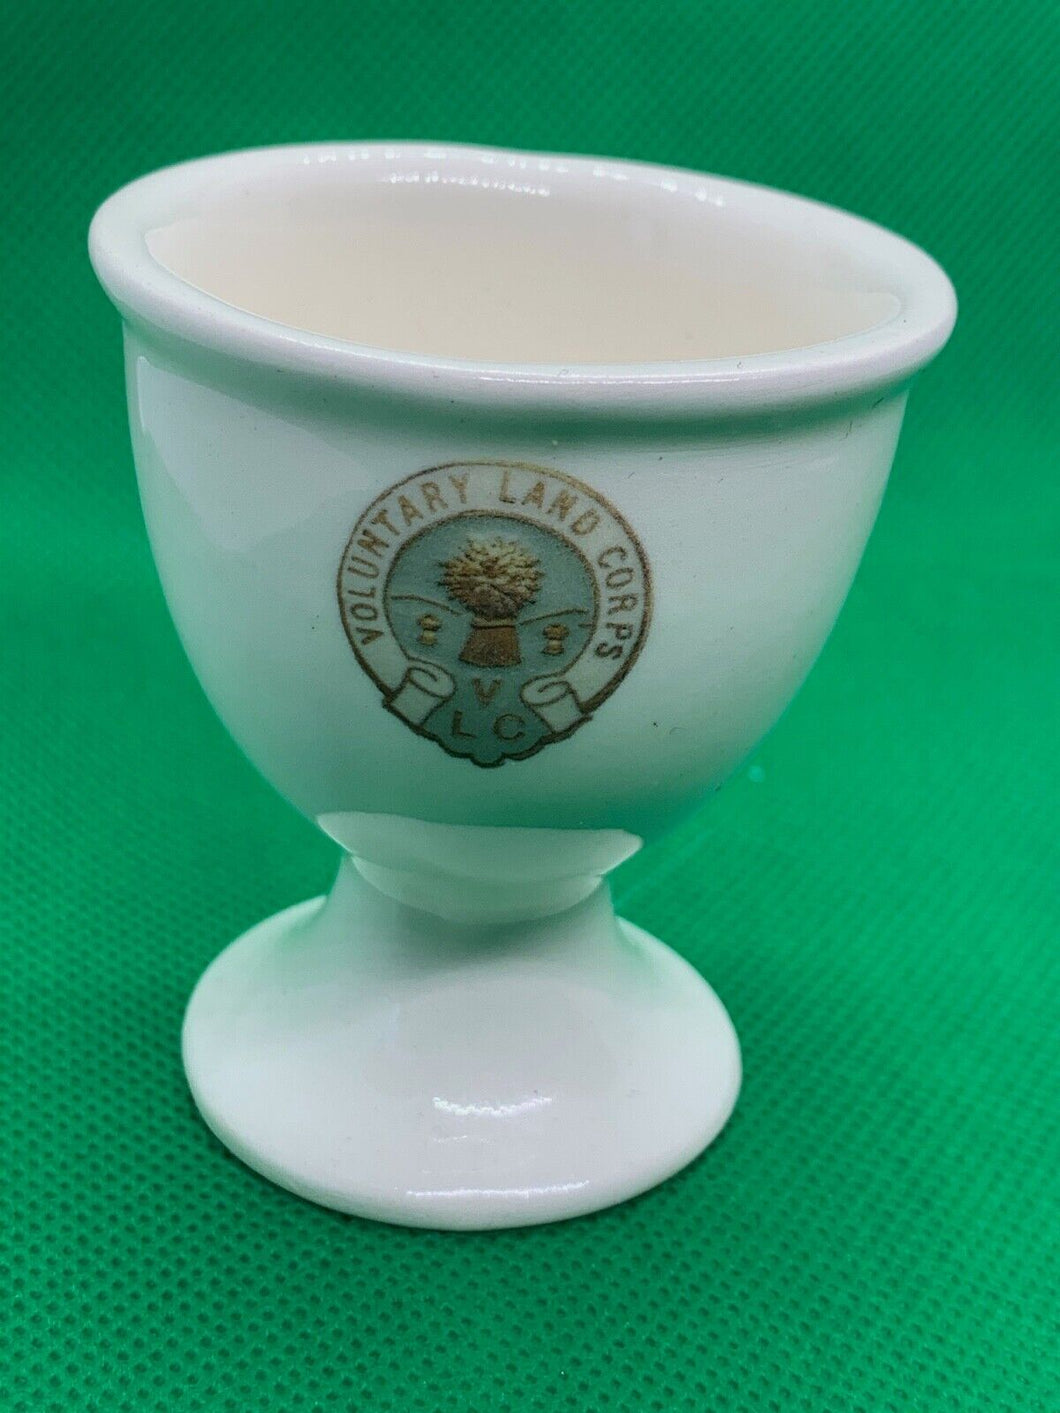 Voluntary Land Corps - No 164 - Badges of Empire Collectors Series Egg Cup